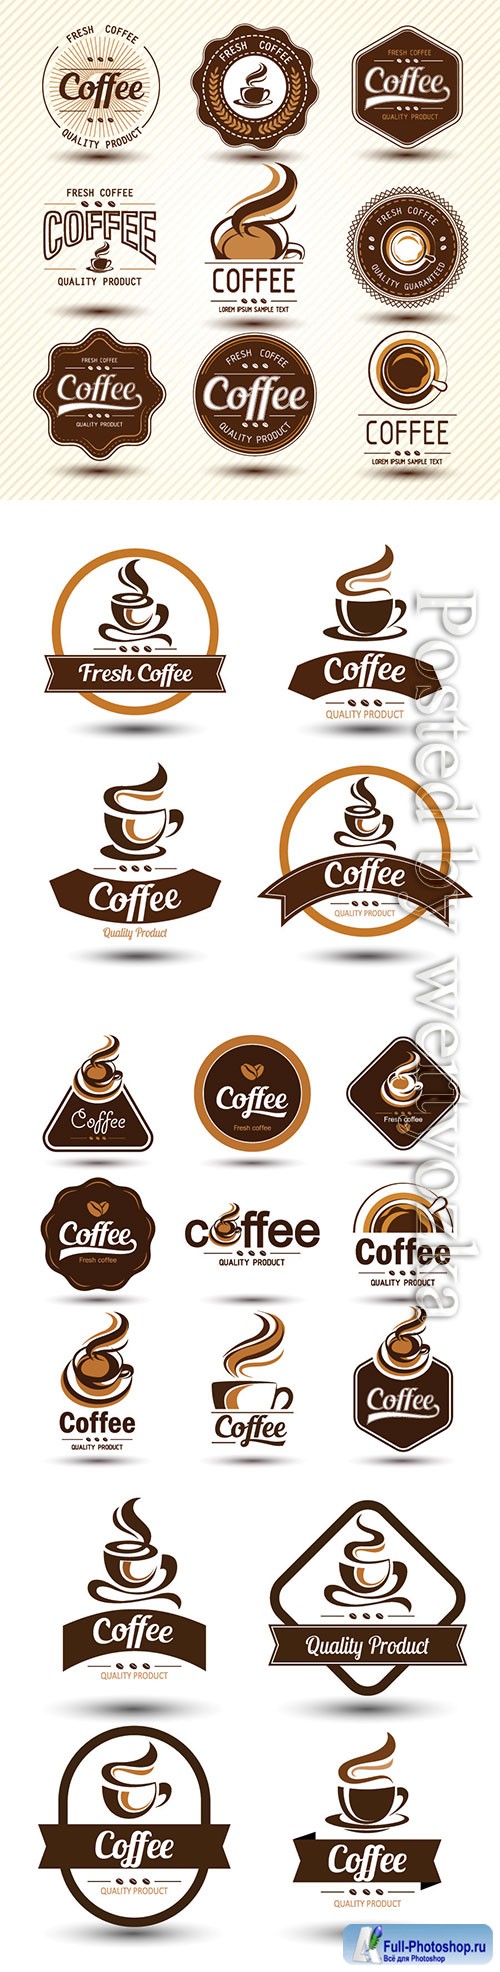 Coffee label collection vector illustration